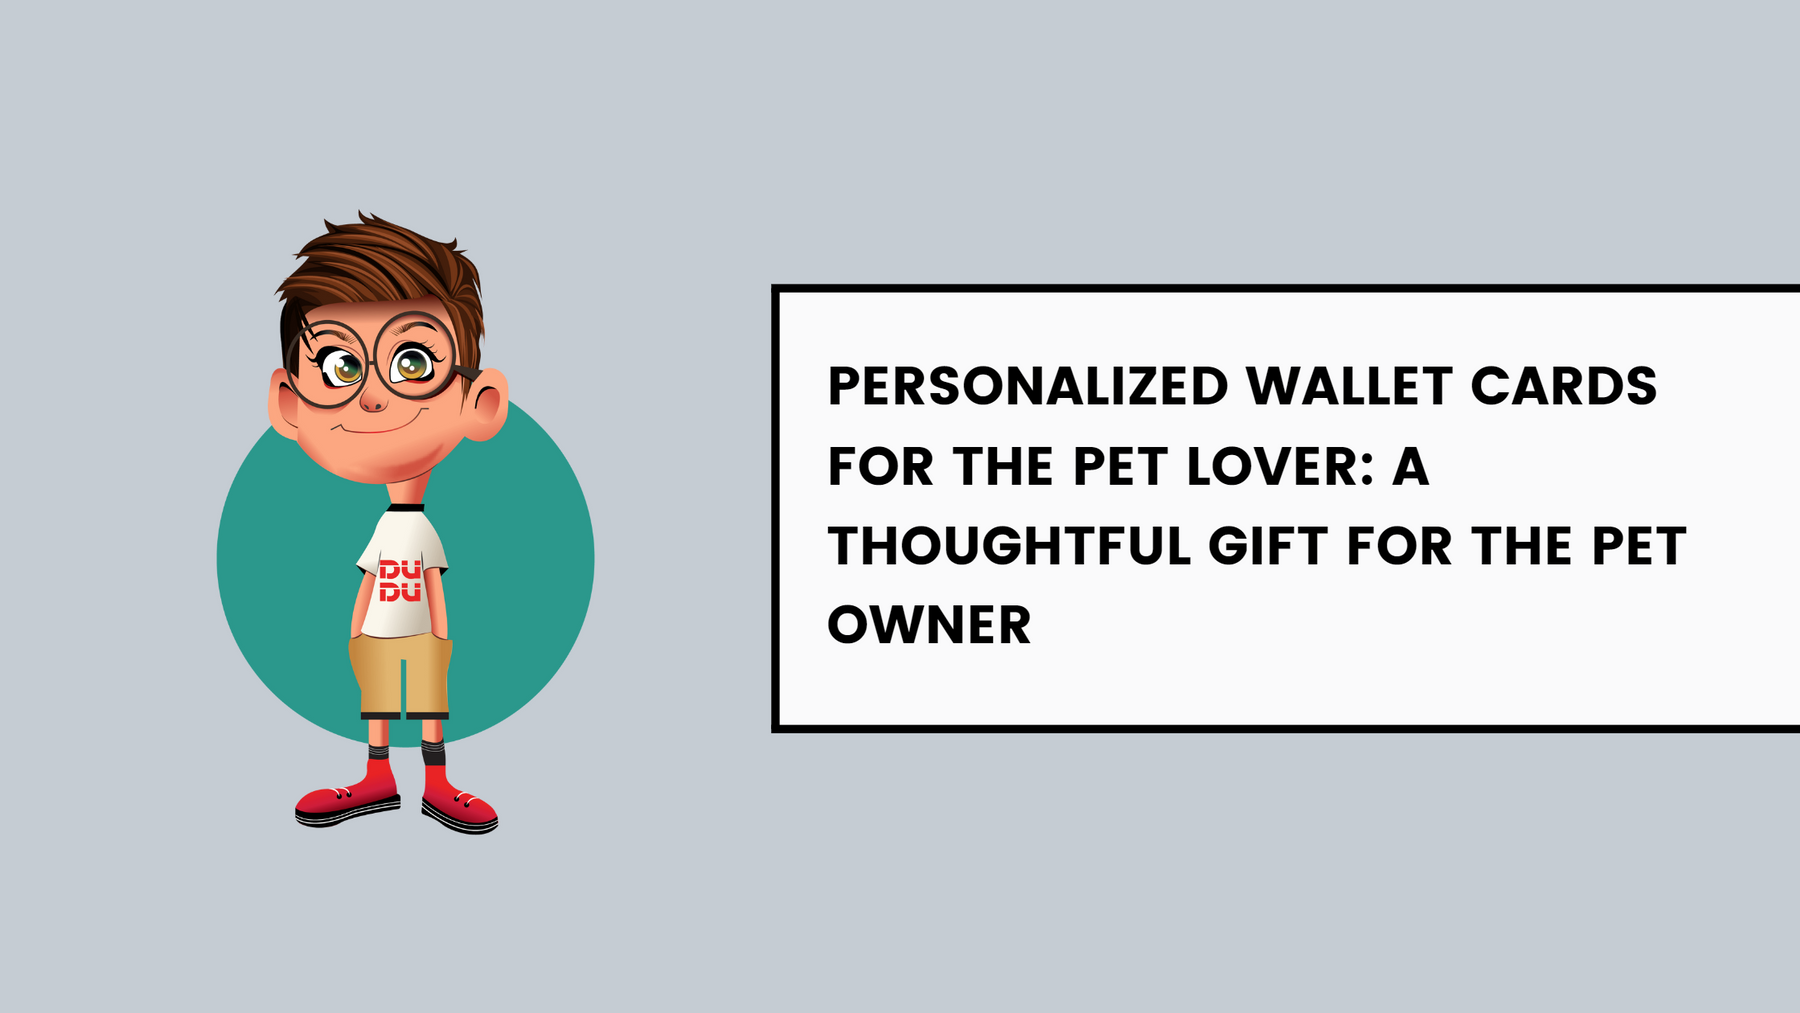 Personalized Wallet Cards For The Pet Lover: A Thoughtful Gift For The Pet Owner